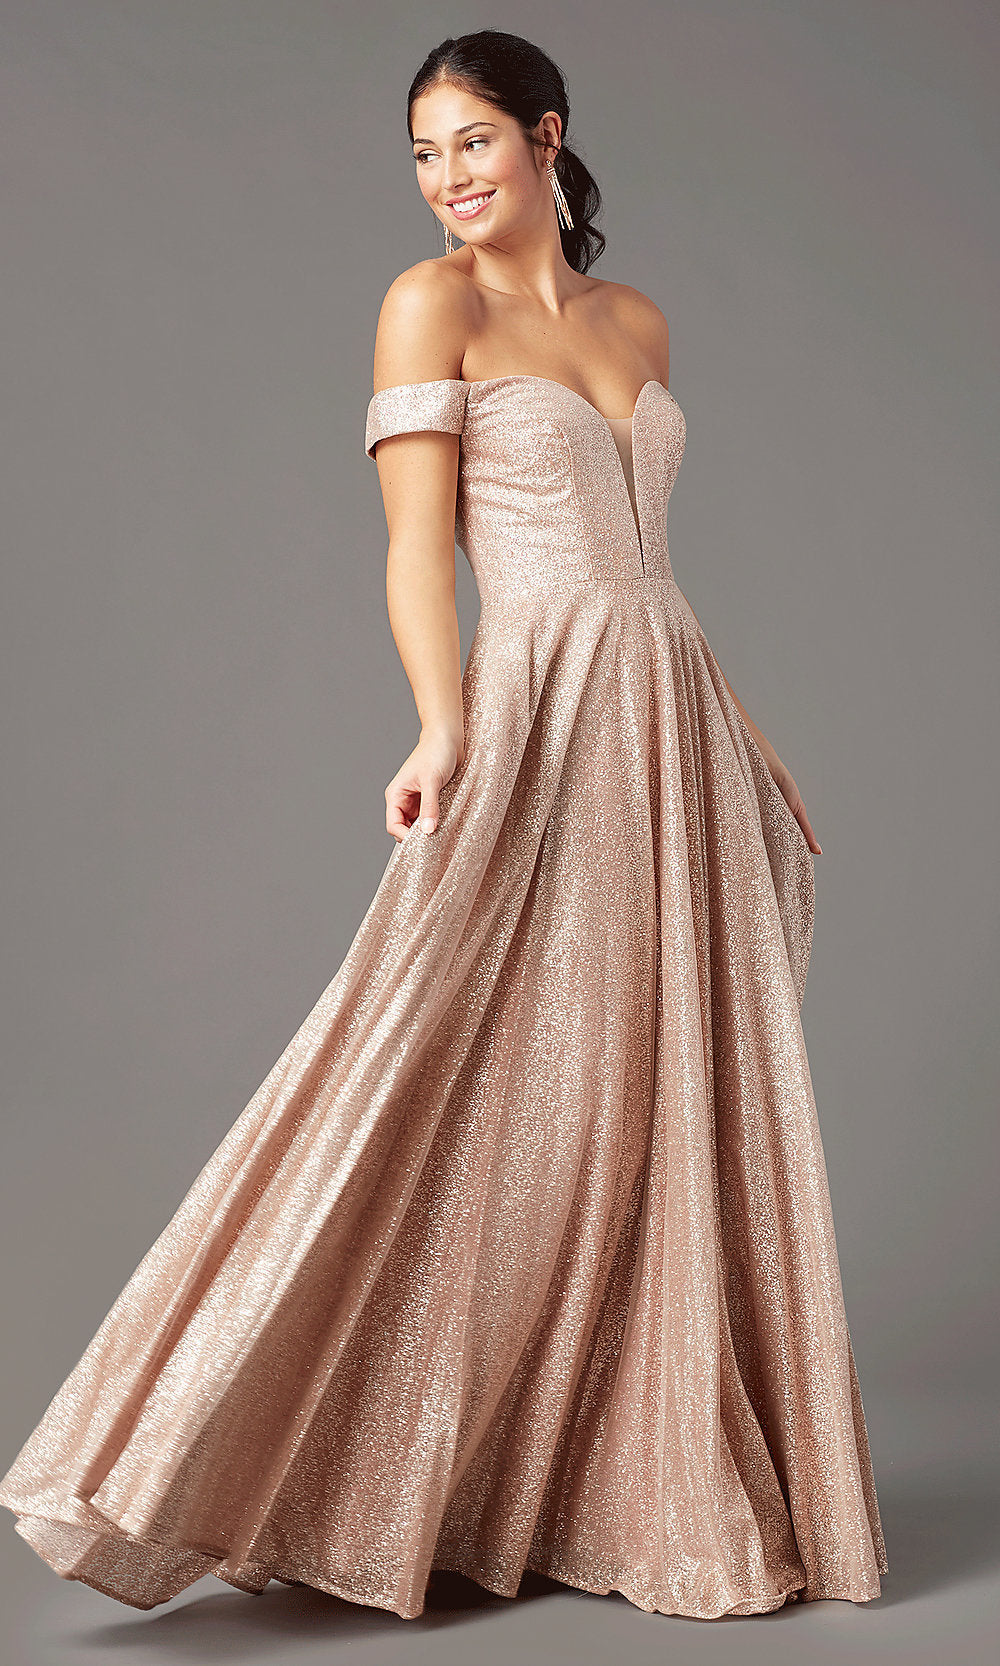 Rose Gold Sparkly Long Prom Dress by PromGirl